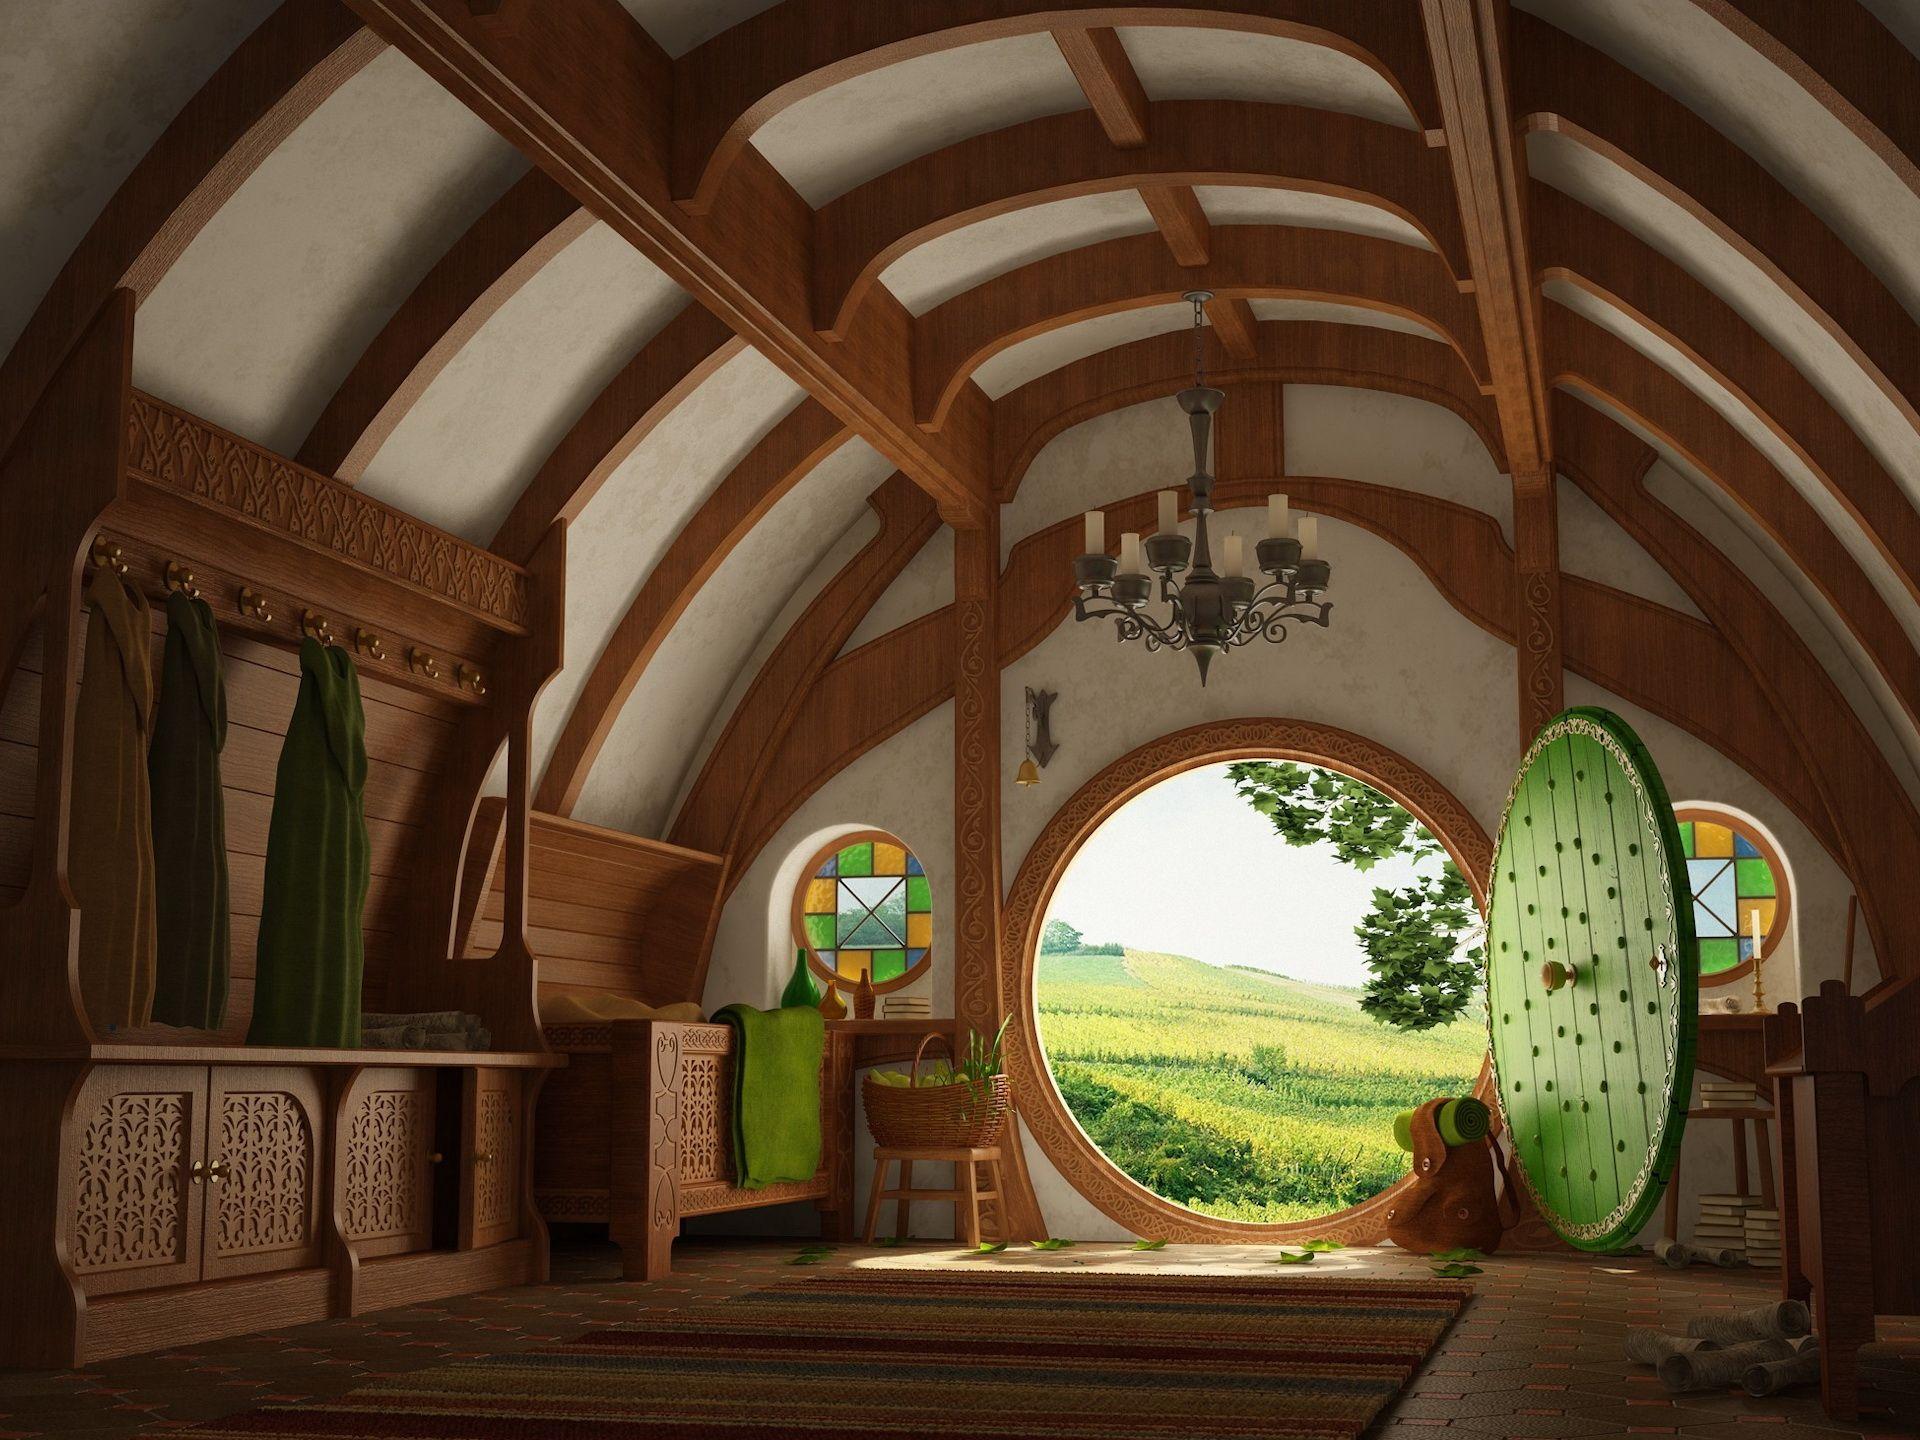 The Lord of the Rings, The Shire, Bag End wallpaper